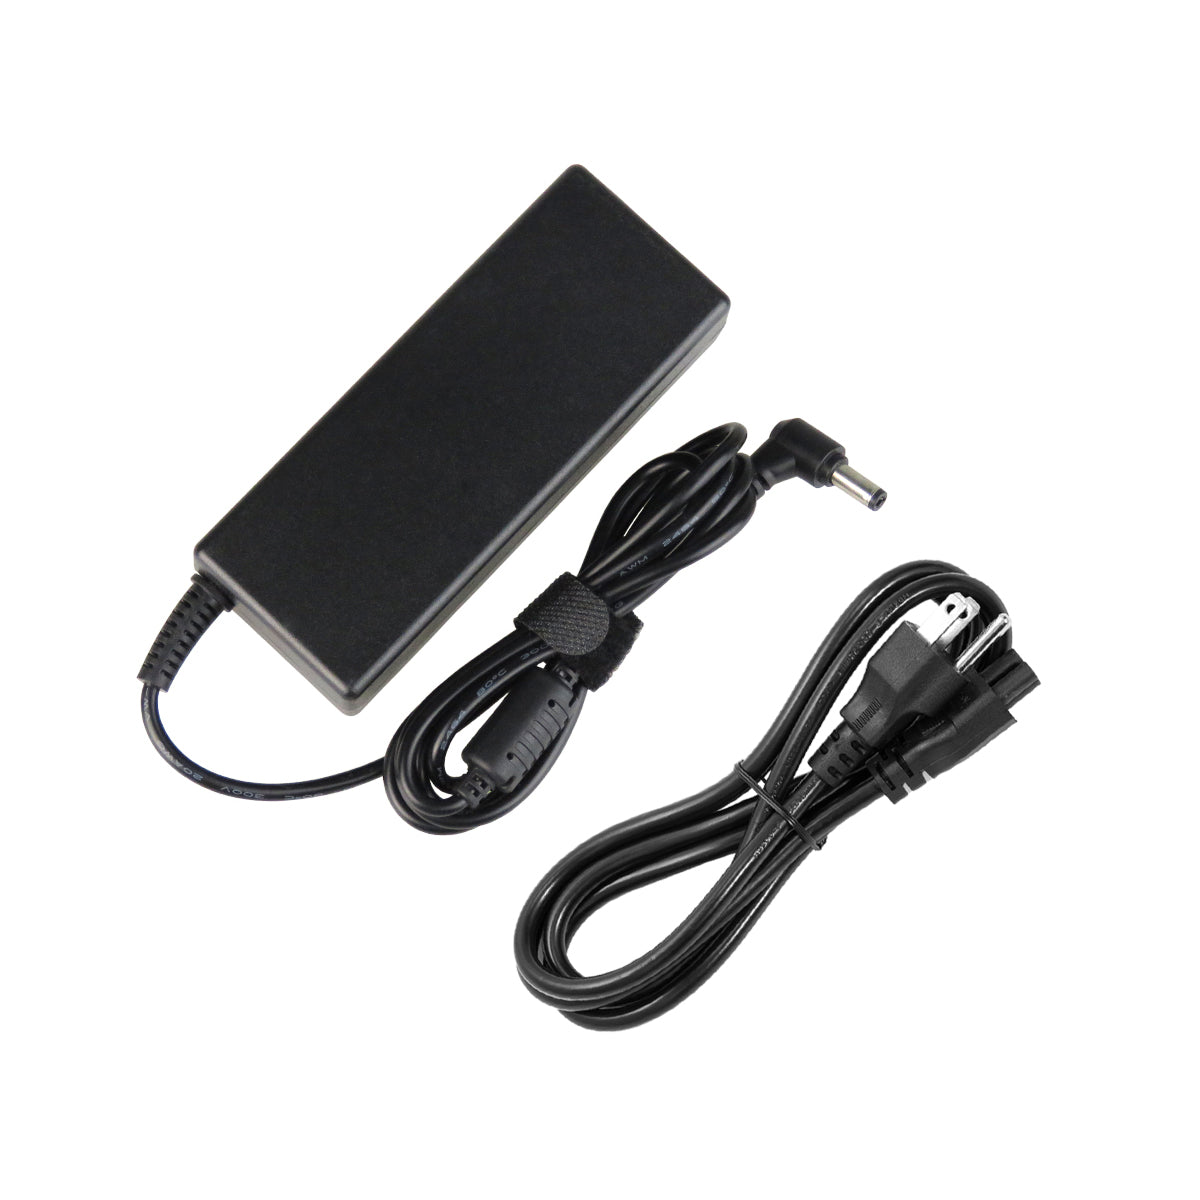 AC Adapter Charger for ASUS K55DE Notebook.